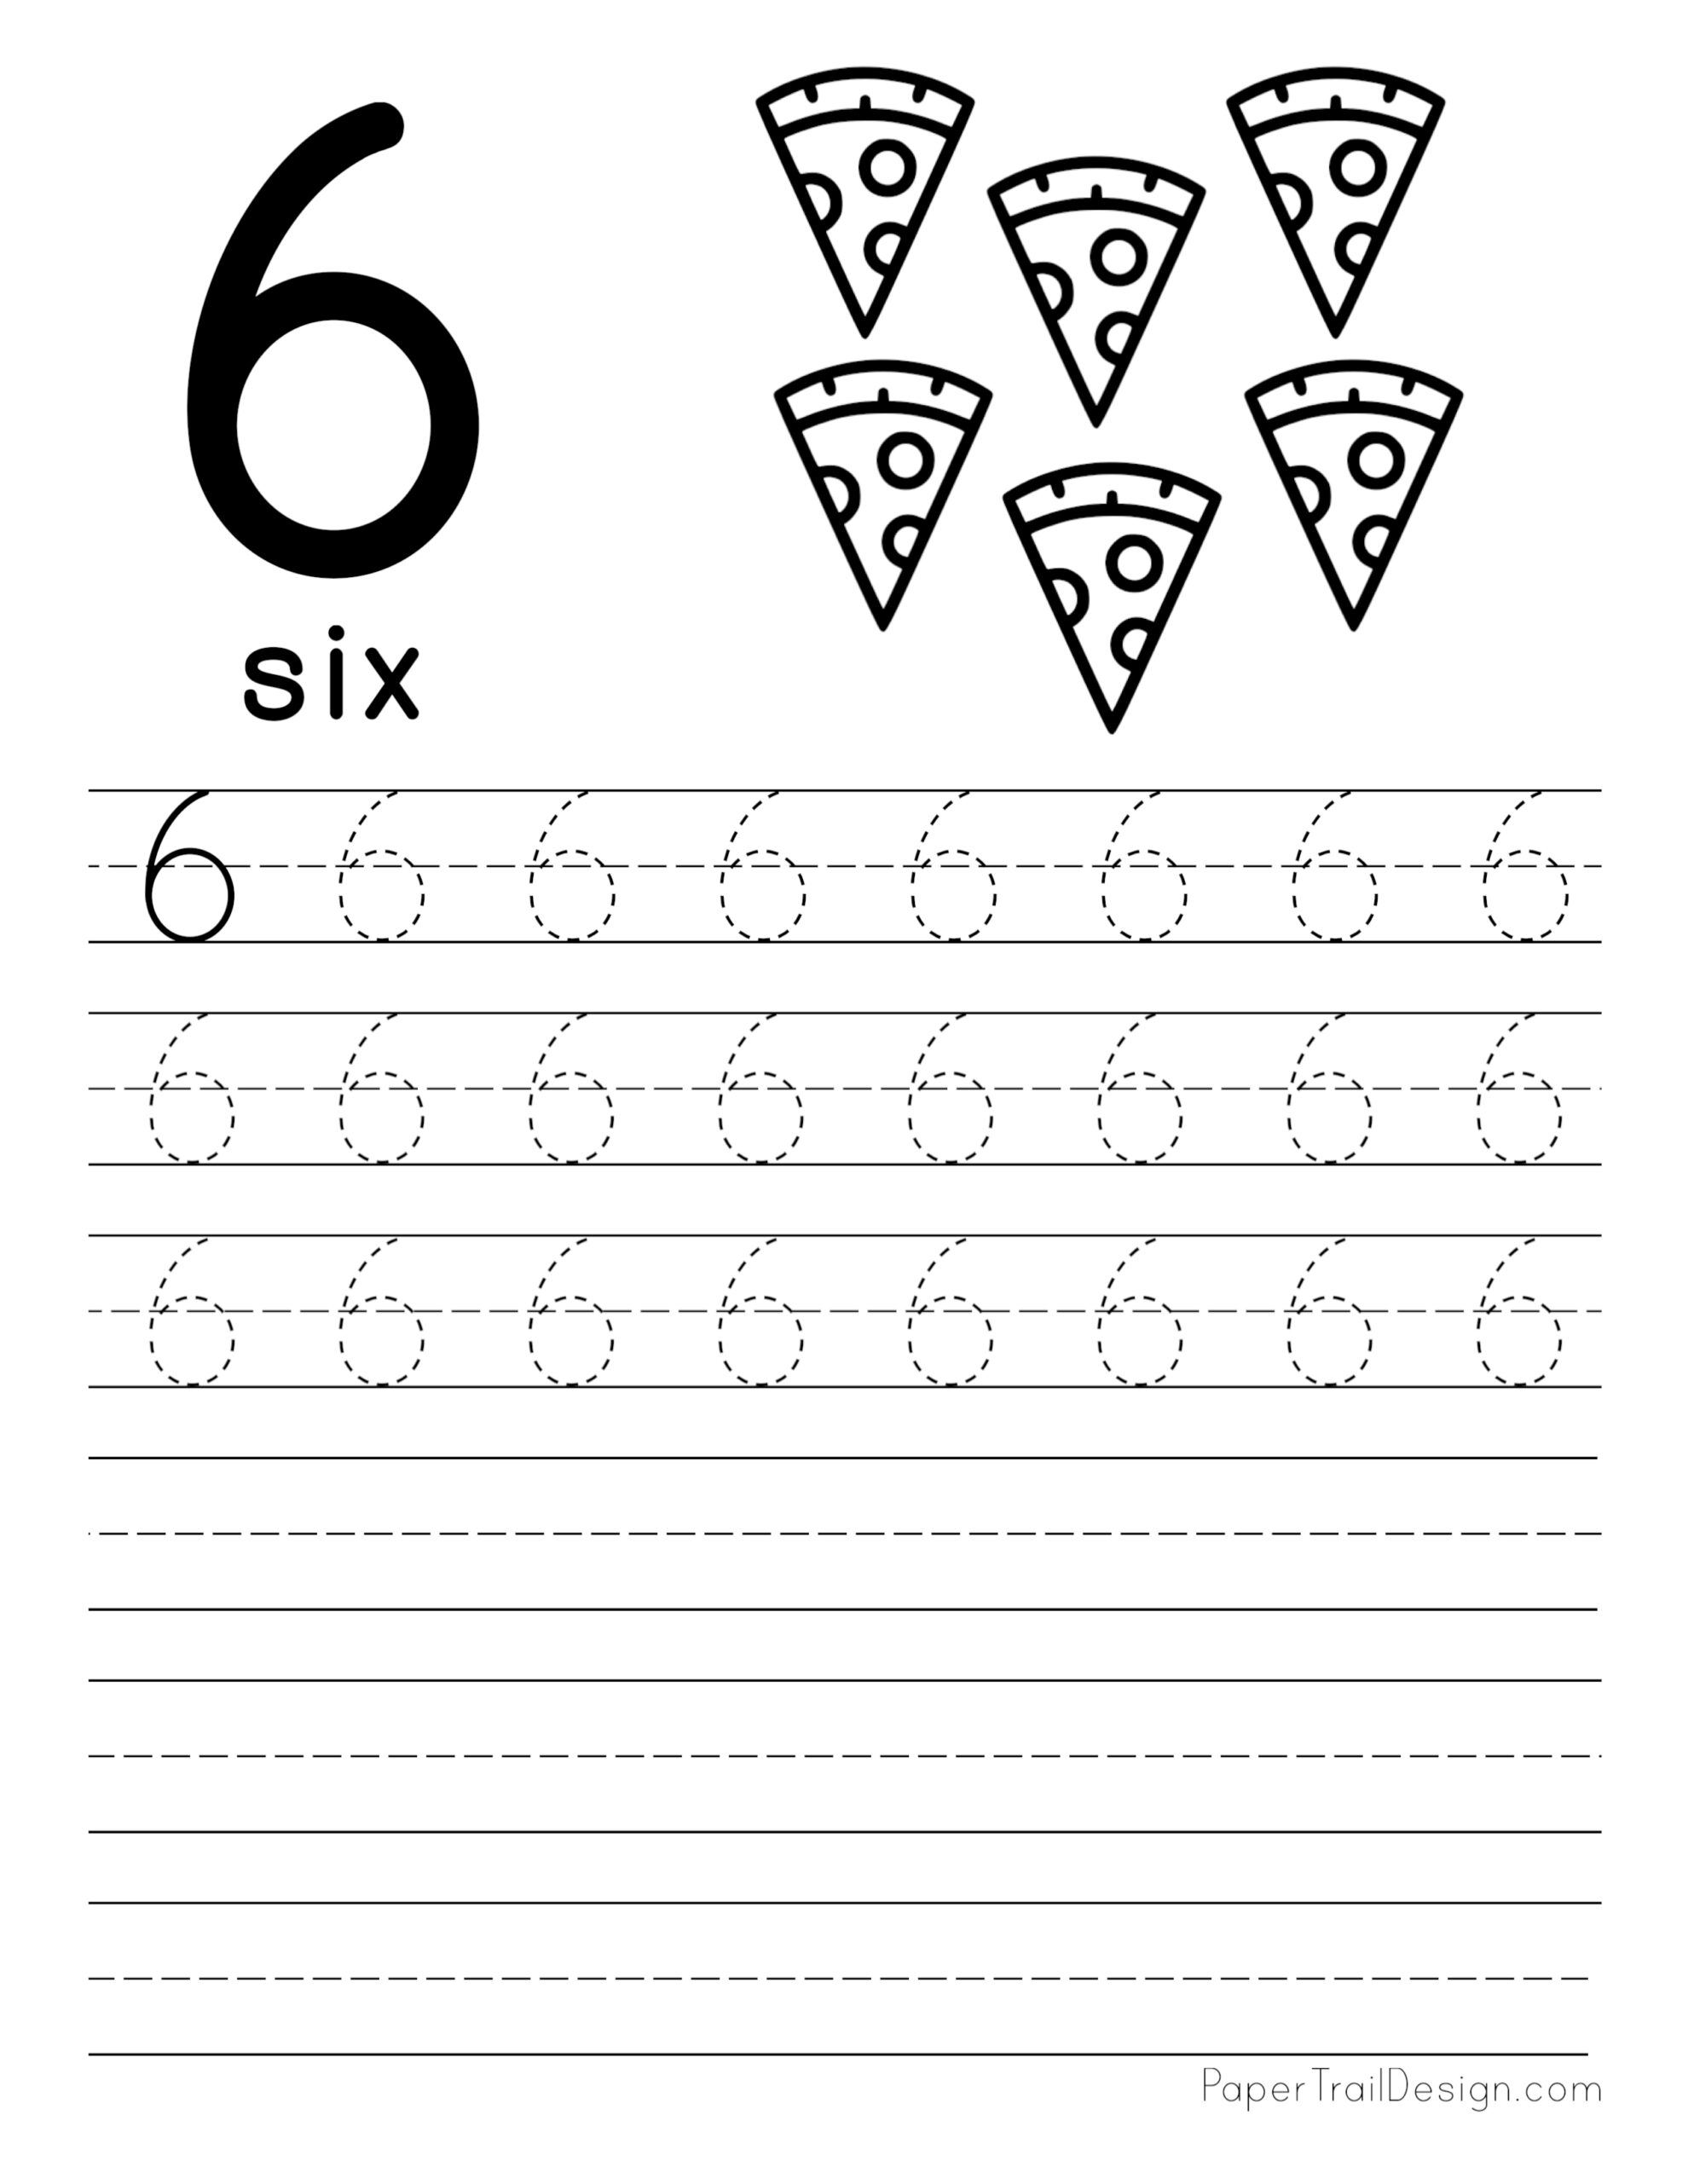 Free Number Tracing Worksheets | Paper Trail Design